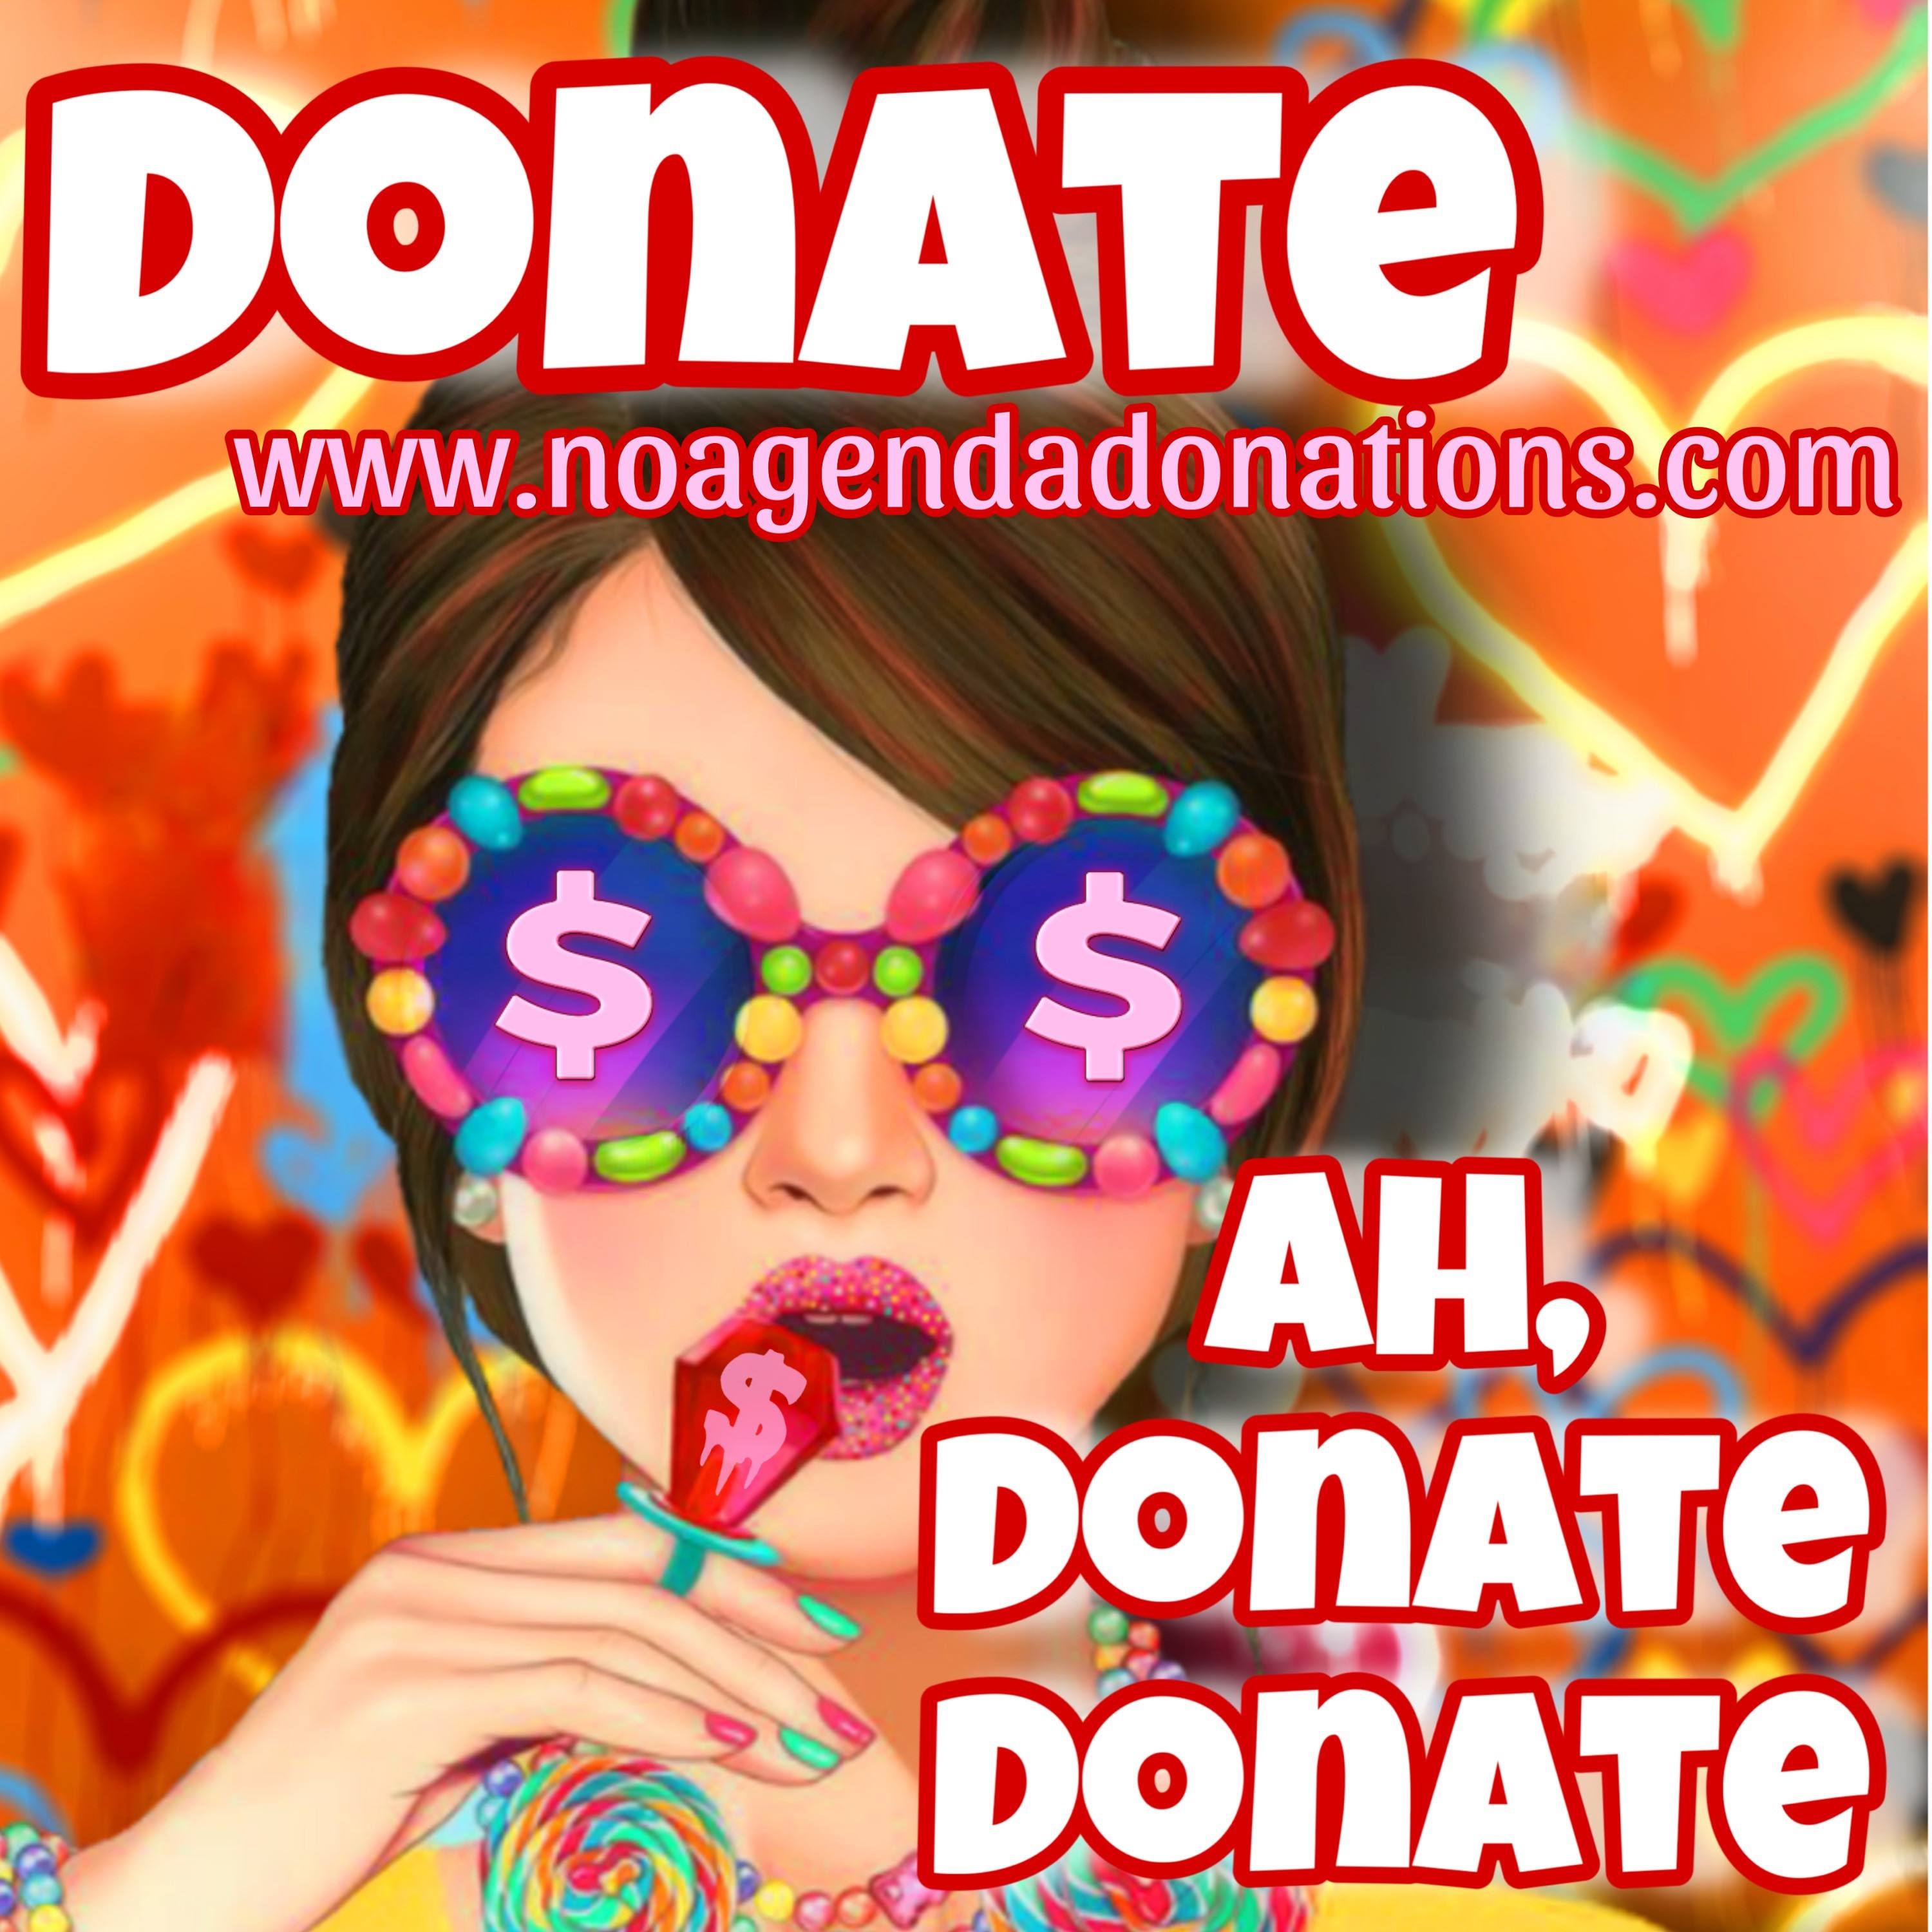 Donate, Sugar! by Sweet Cheeks for 